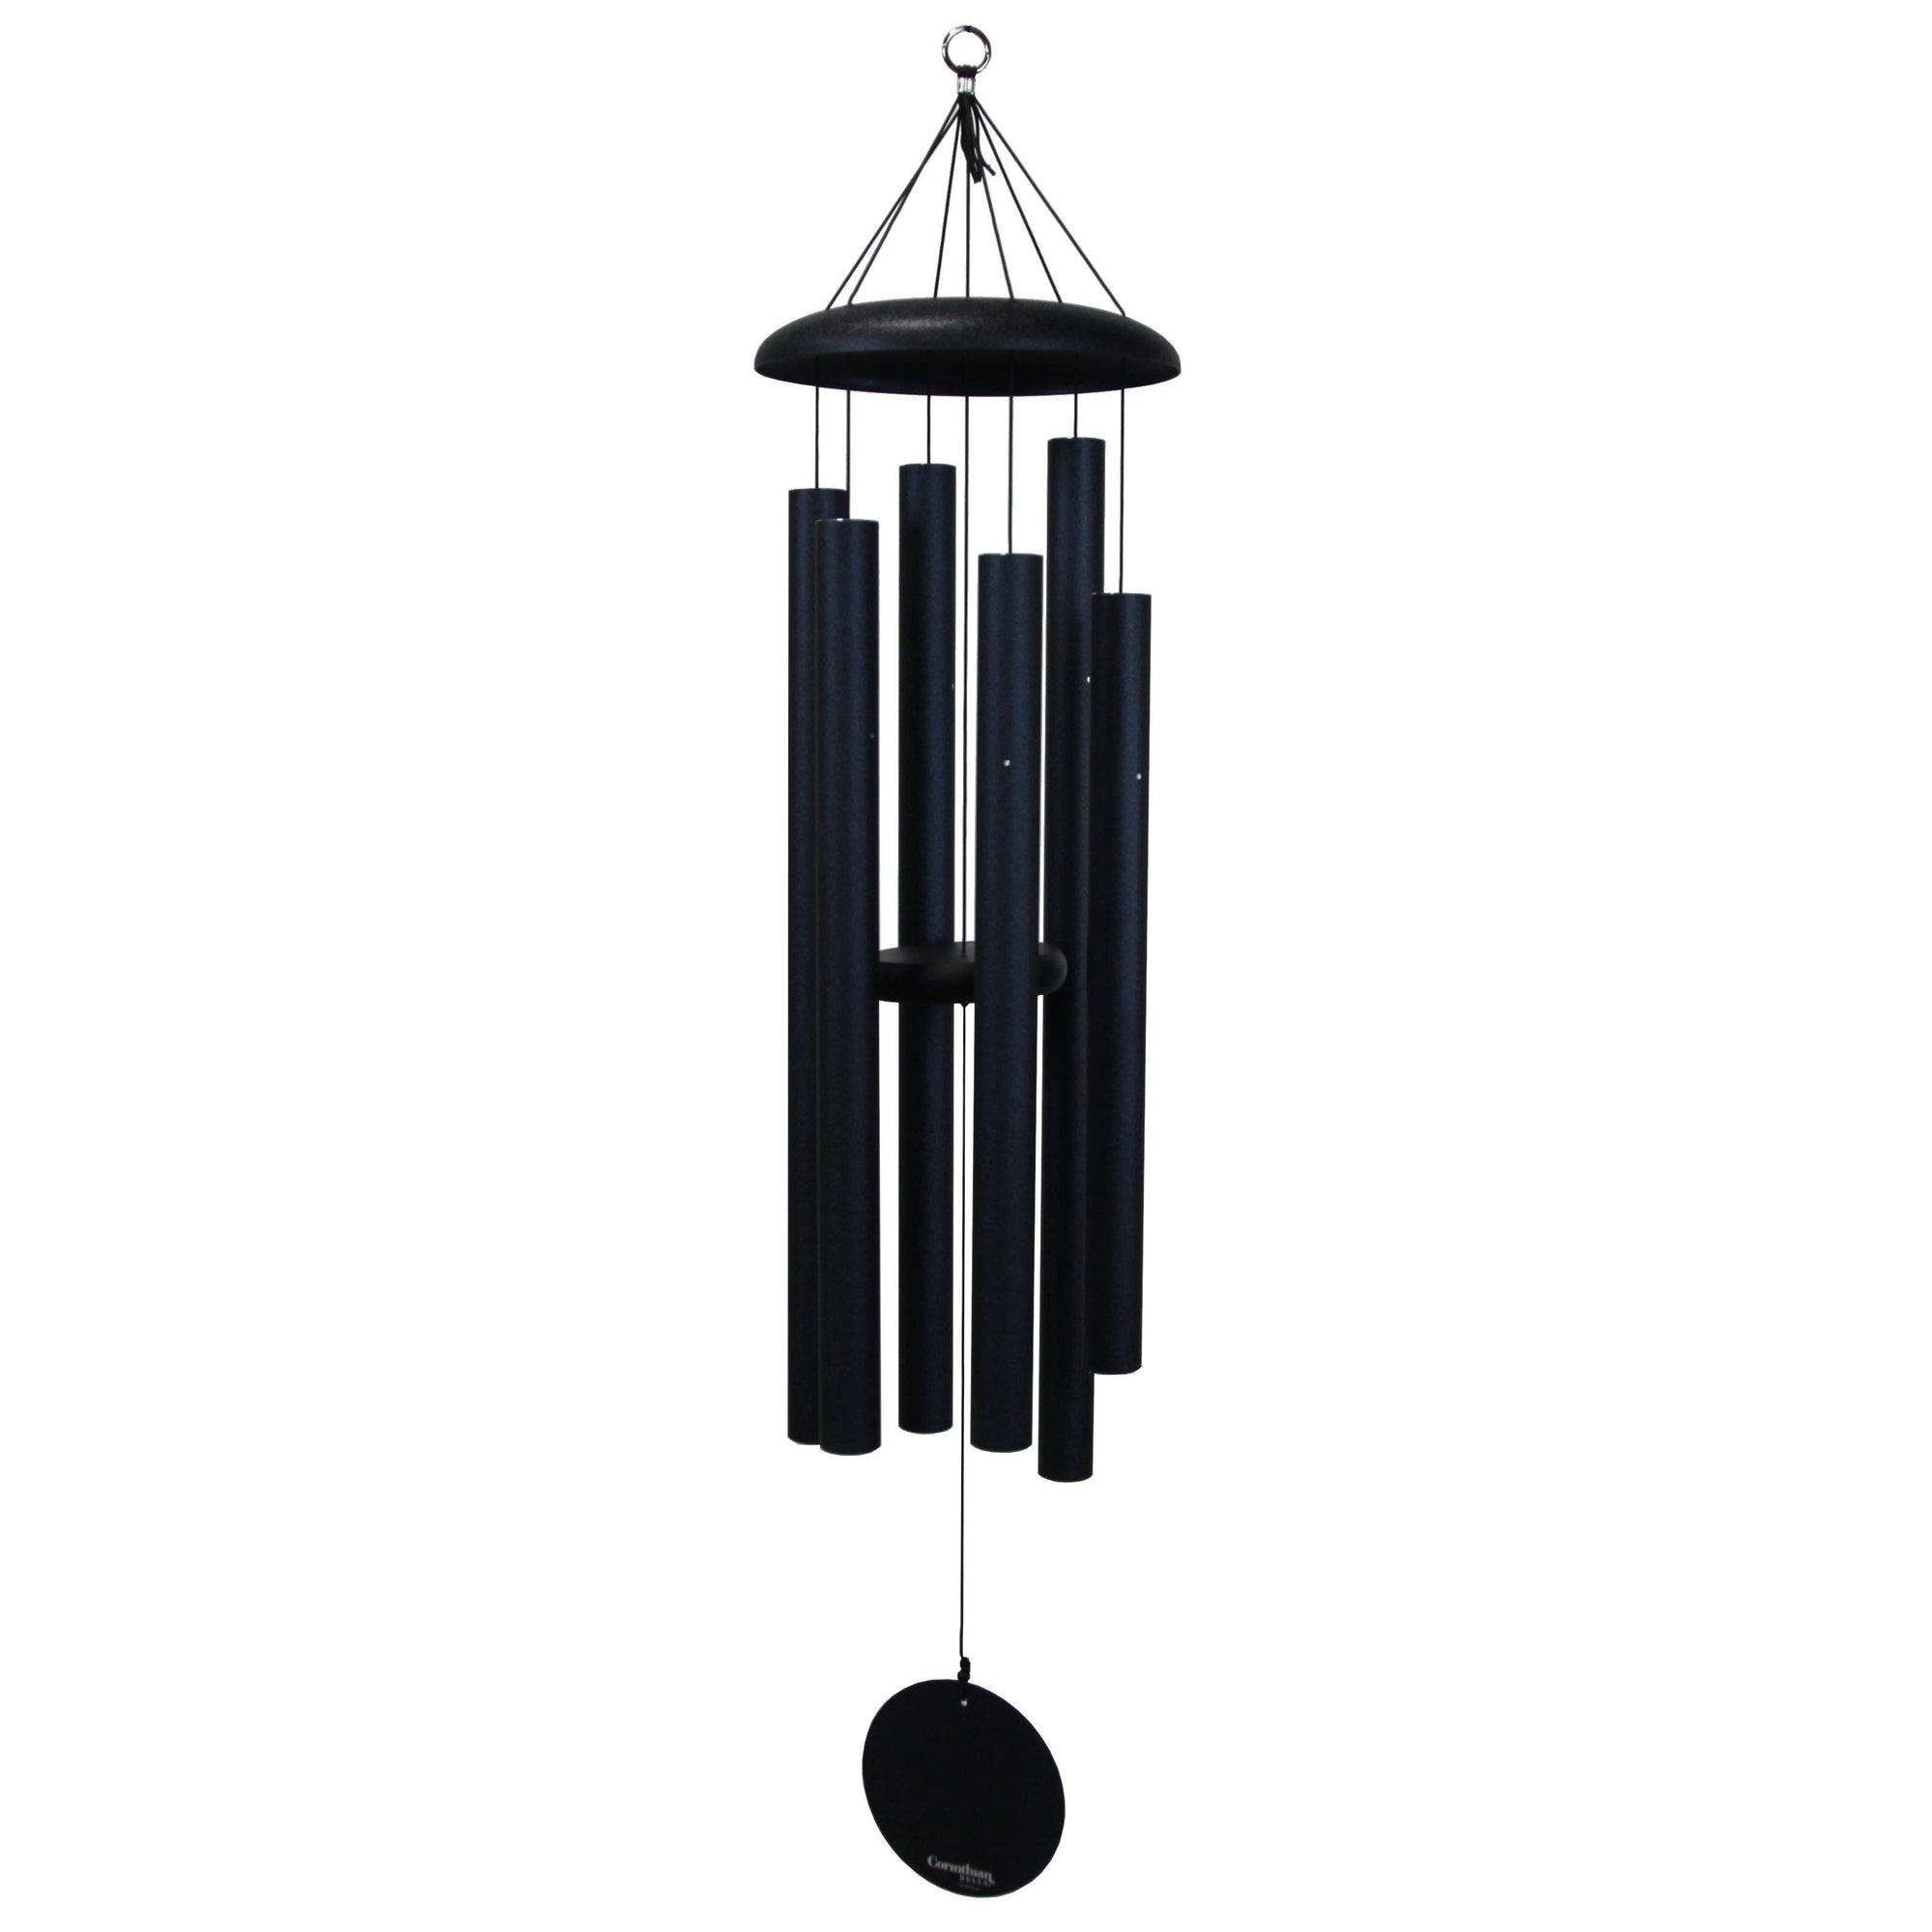 A Corinthian Bells® 50-inch Windchime with black tones hanging on a white background.